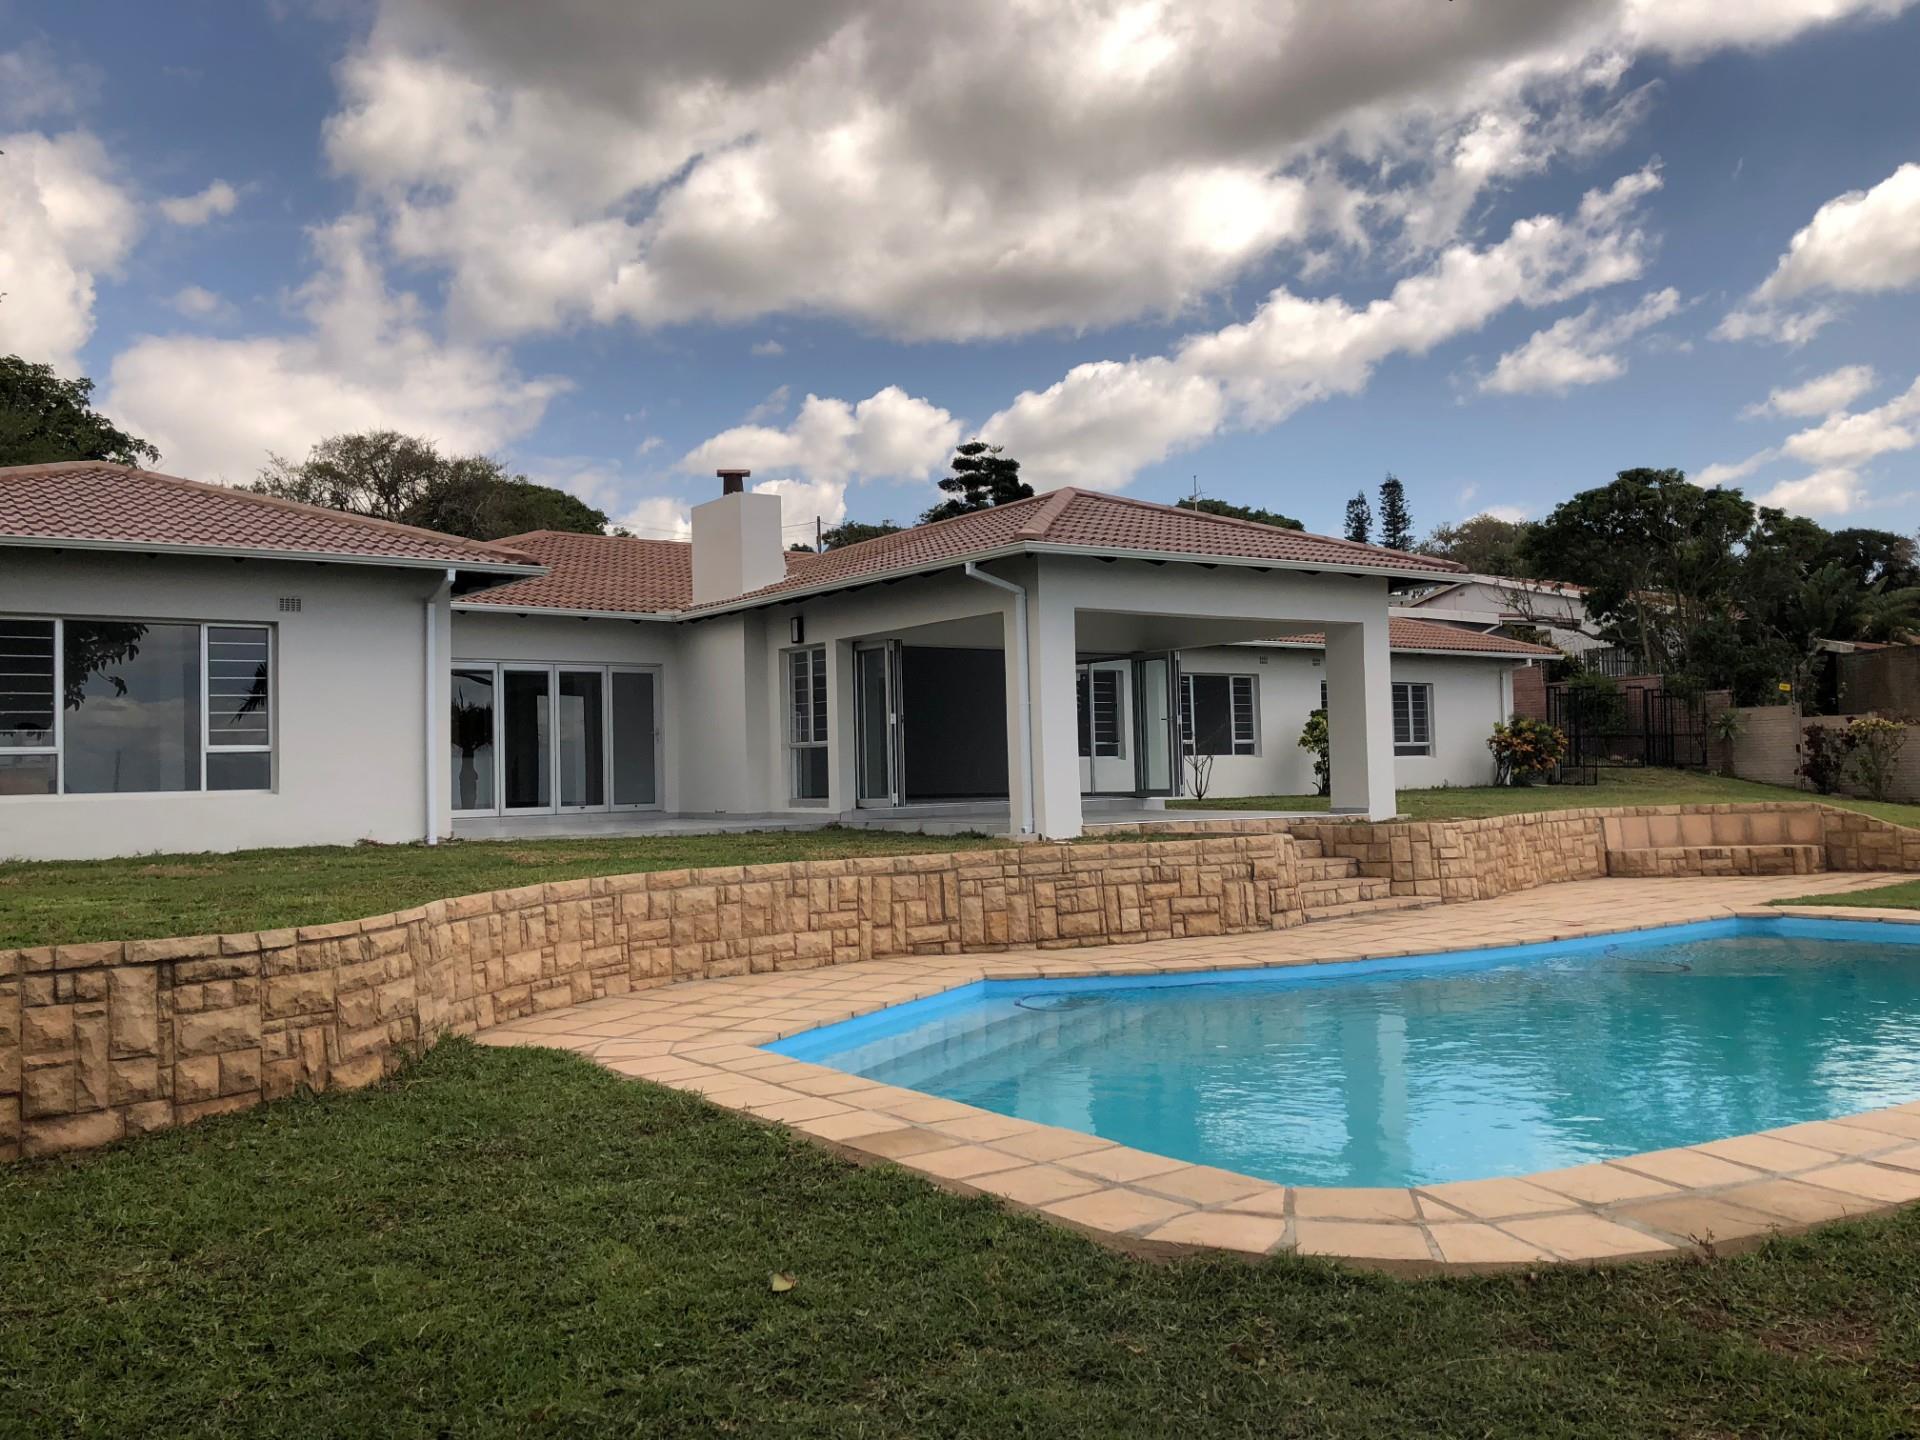 5 Bedroom House For Sale in Amanzimtoti | RE/MAX™ of Southern Africa